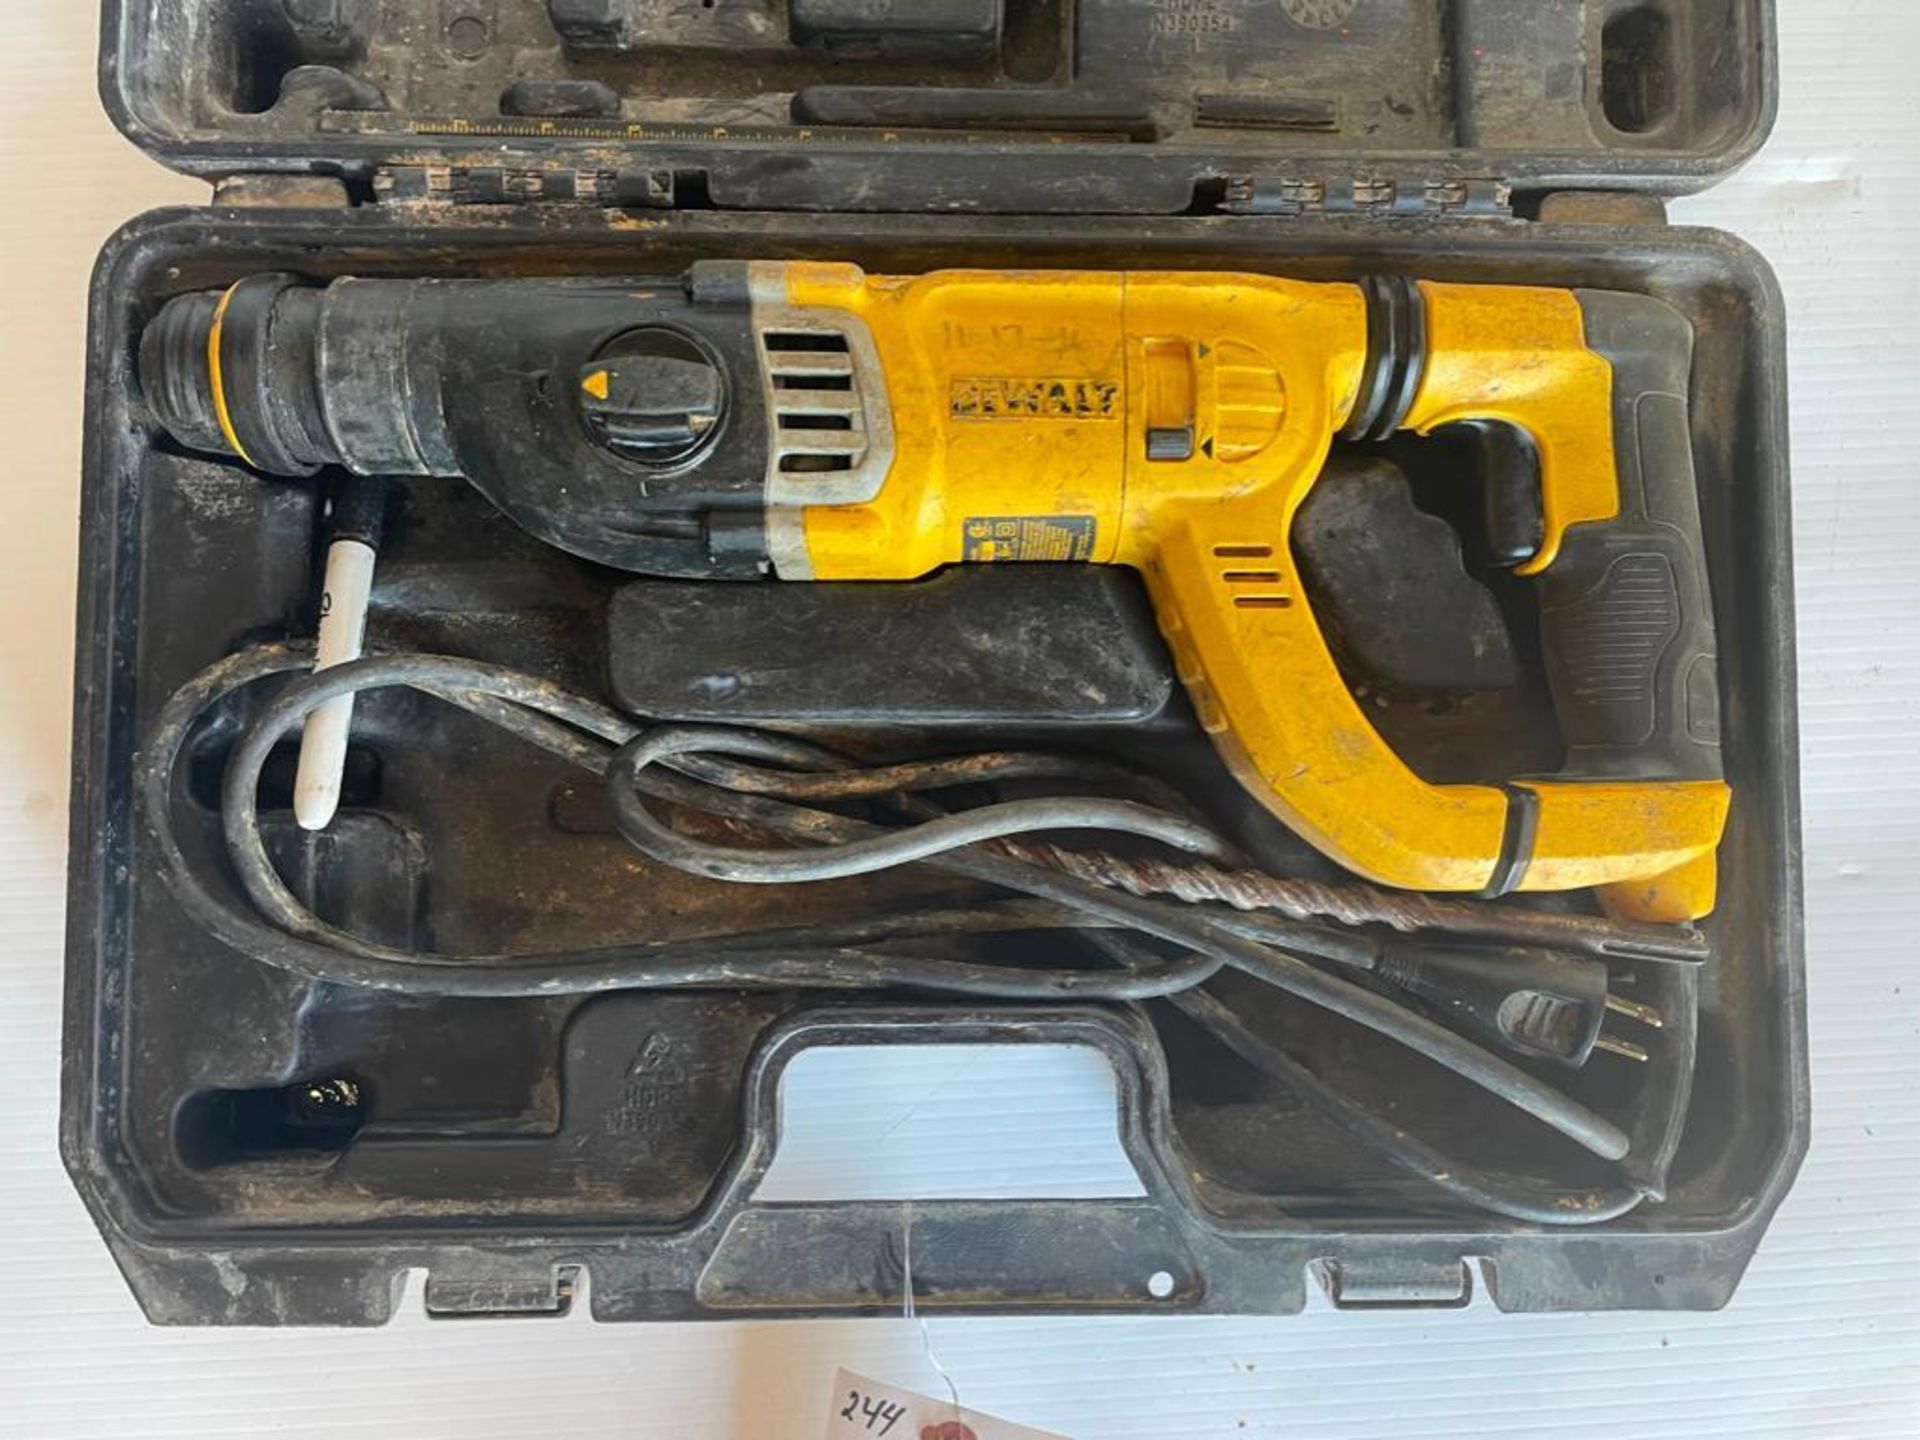 DeWalt D25263 Hammer Drill, Serial #045783, 120V in Case. Located in Hazelwood, MO - Image 2 of 4